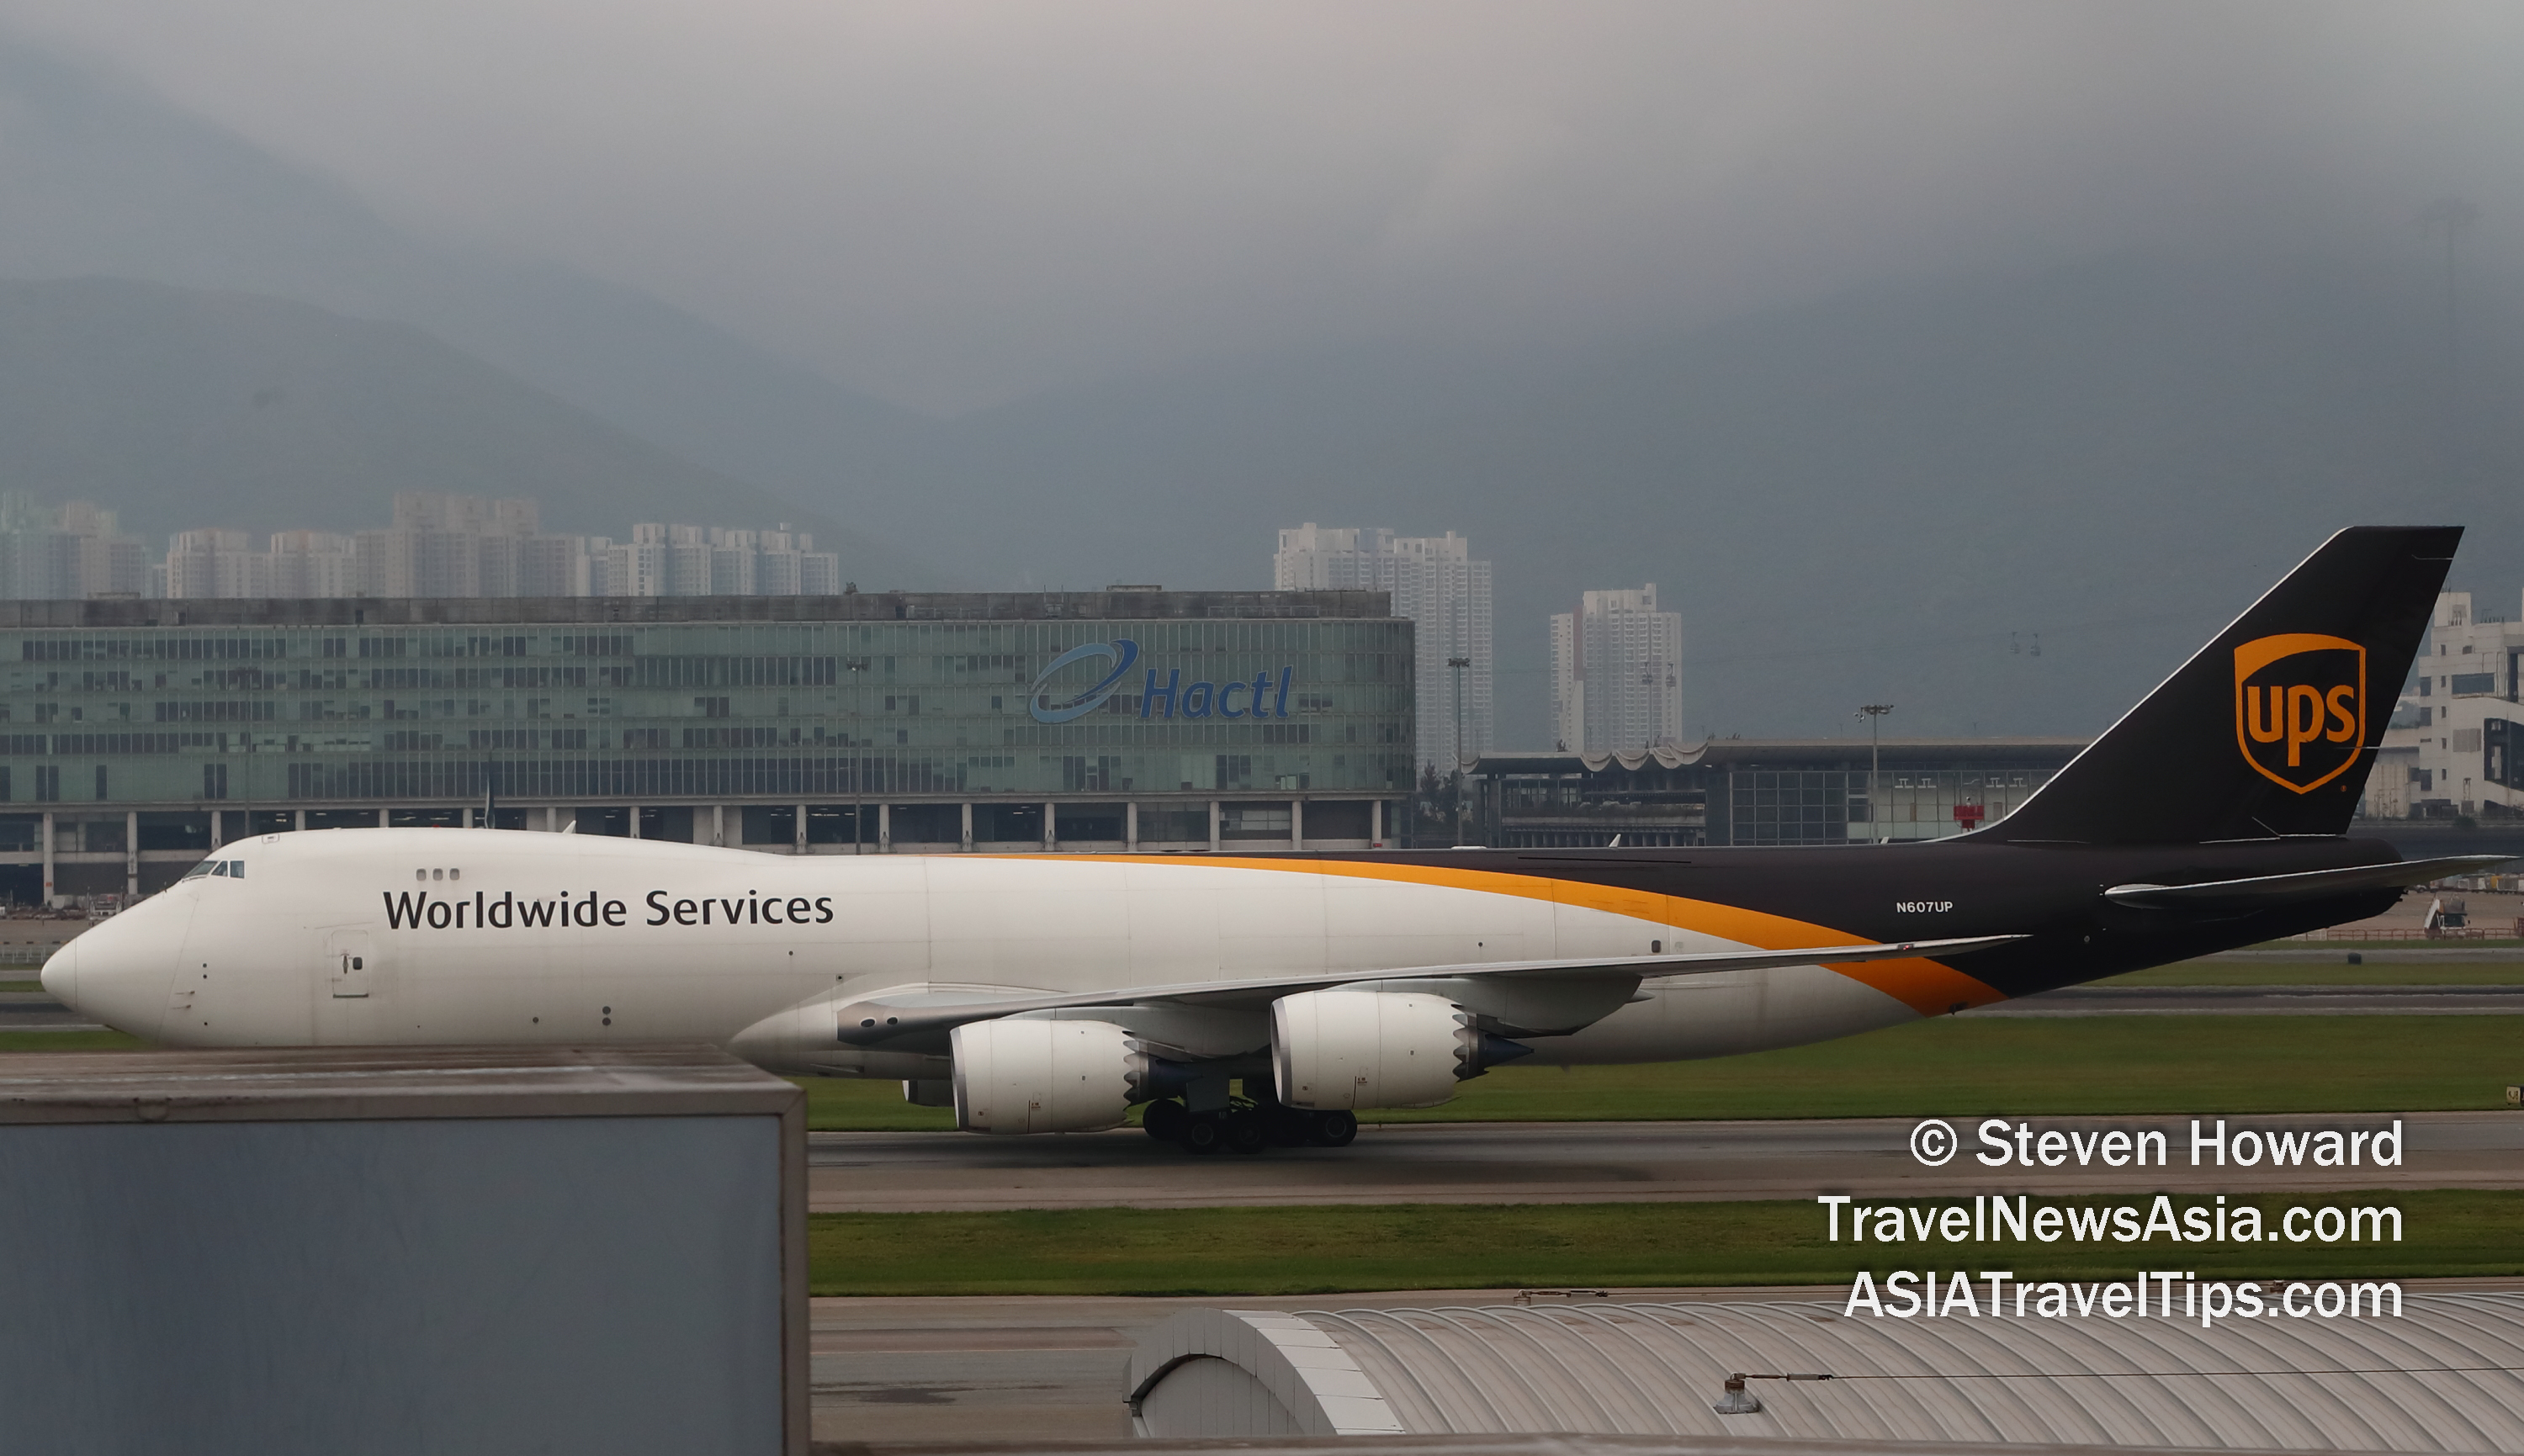 UPS Boeing 747-8F reg: N607UP. Picture by Steven Howard of TravelNewsAsia.com Click to enlarge.